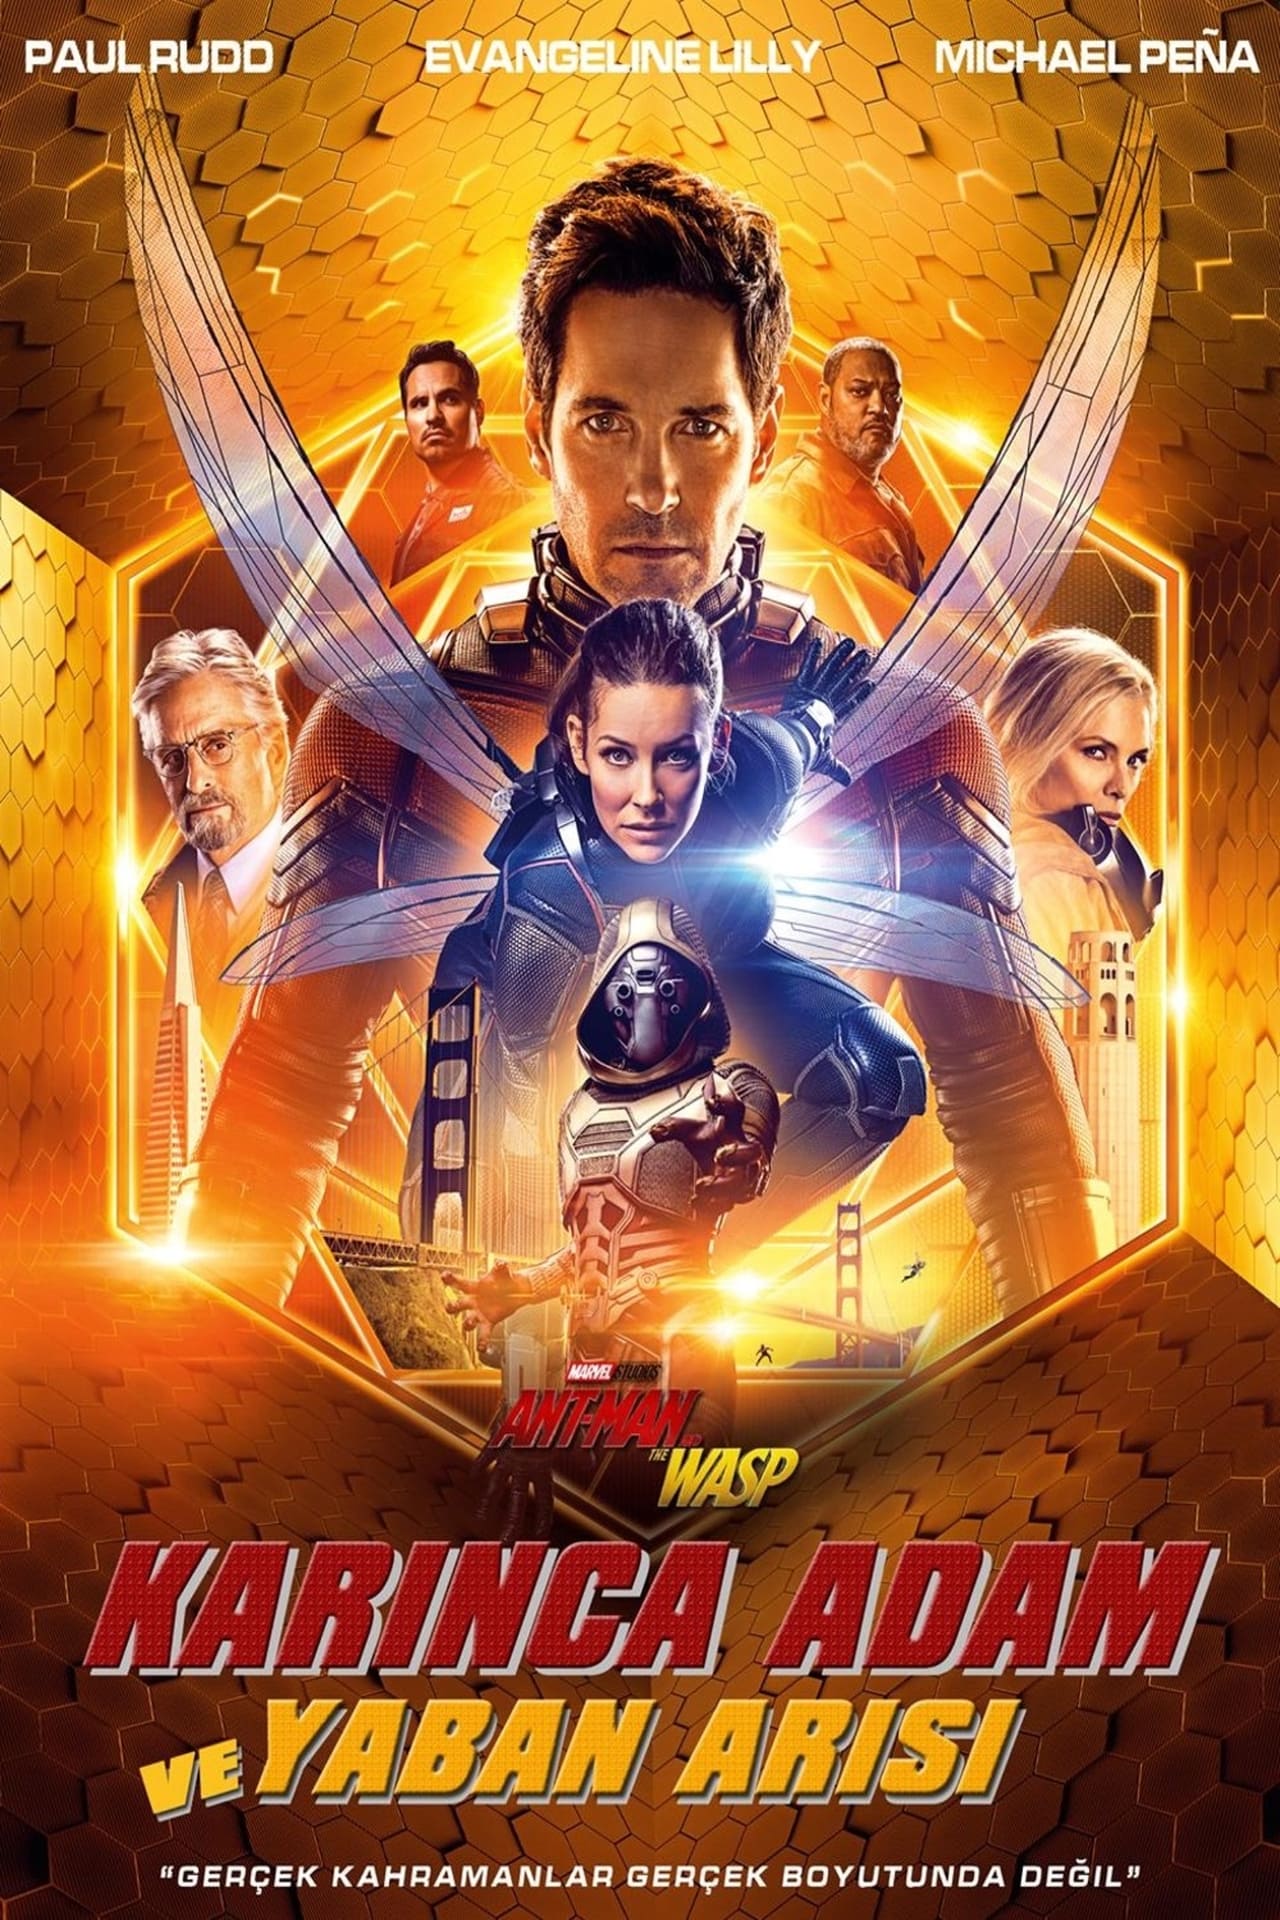 Ant-Man and the Wasp (2018) 256Kbps 23.976Fps 48Khz 5.1Ch Disney+ DD+ E-AC3 Turkish Audio TAC